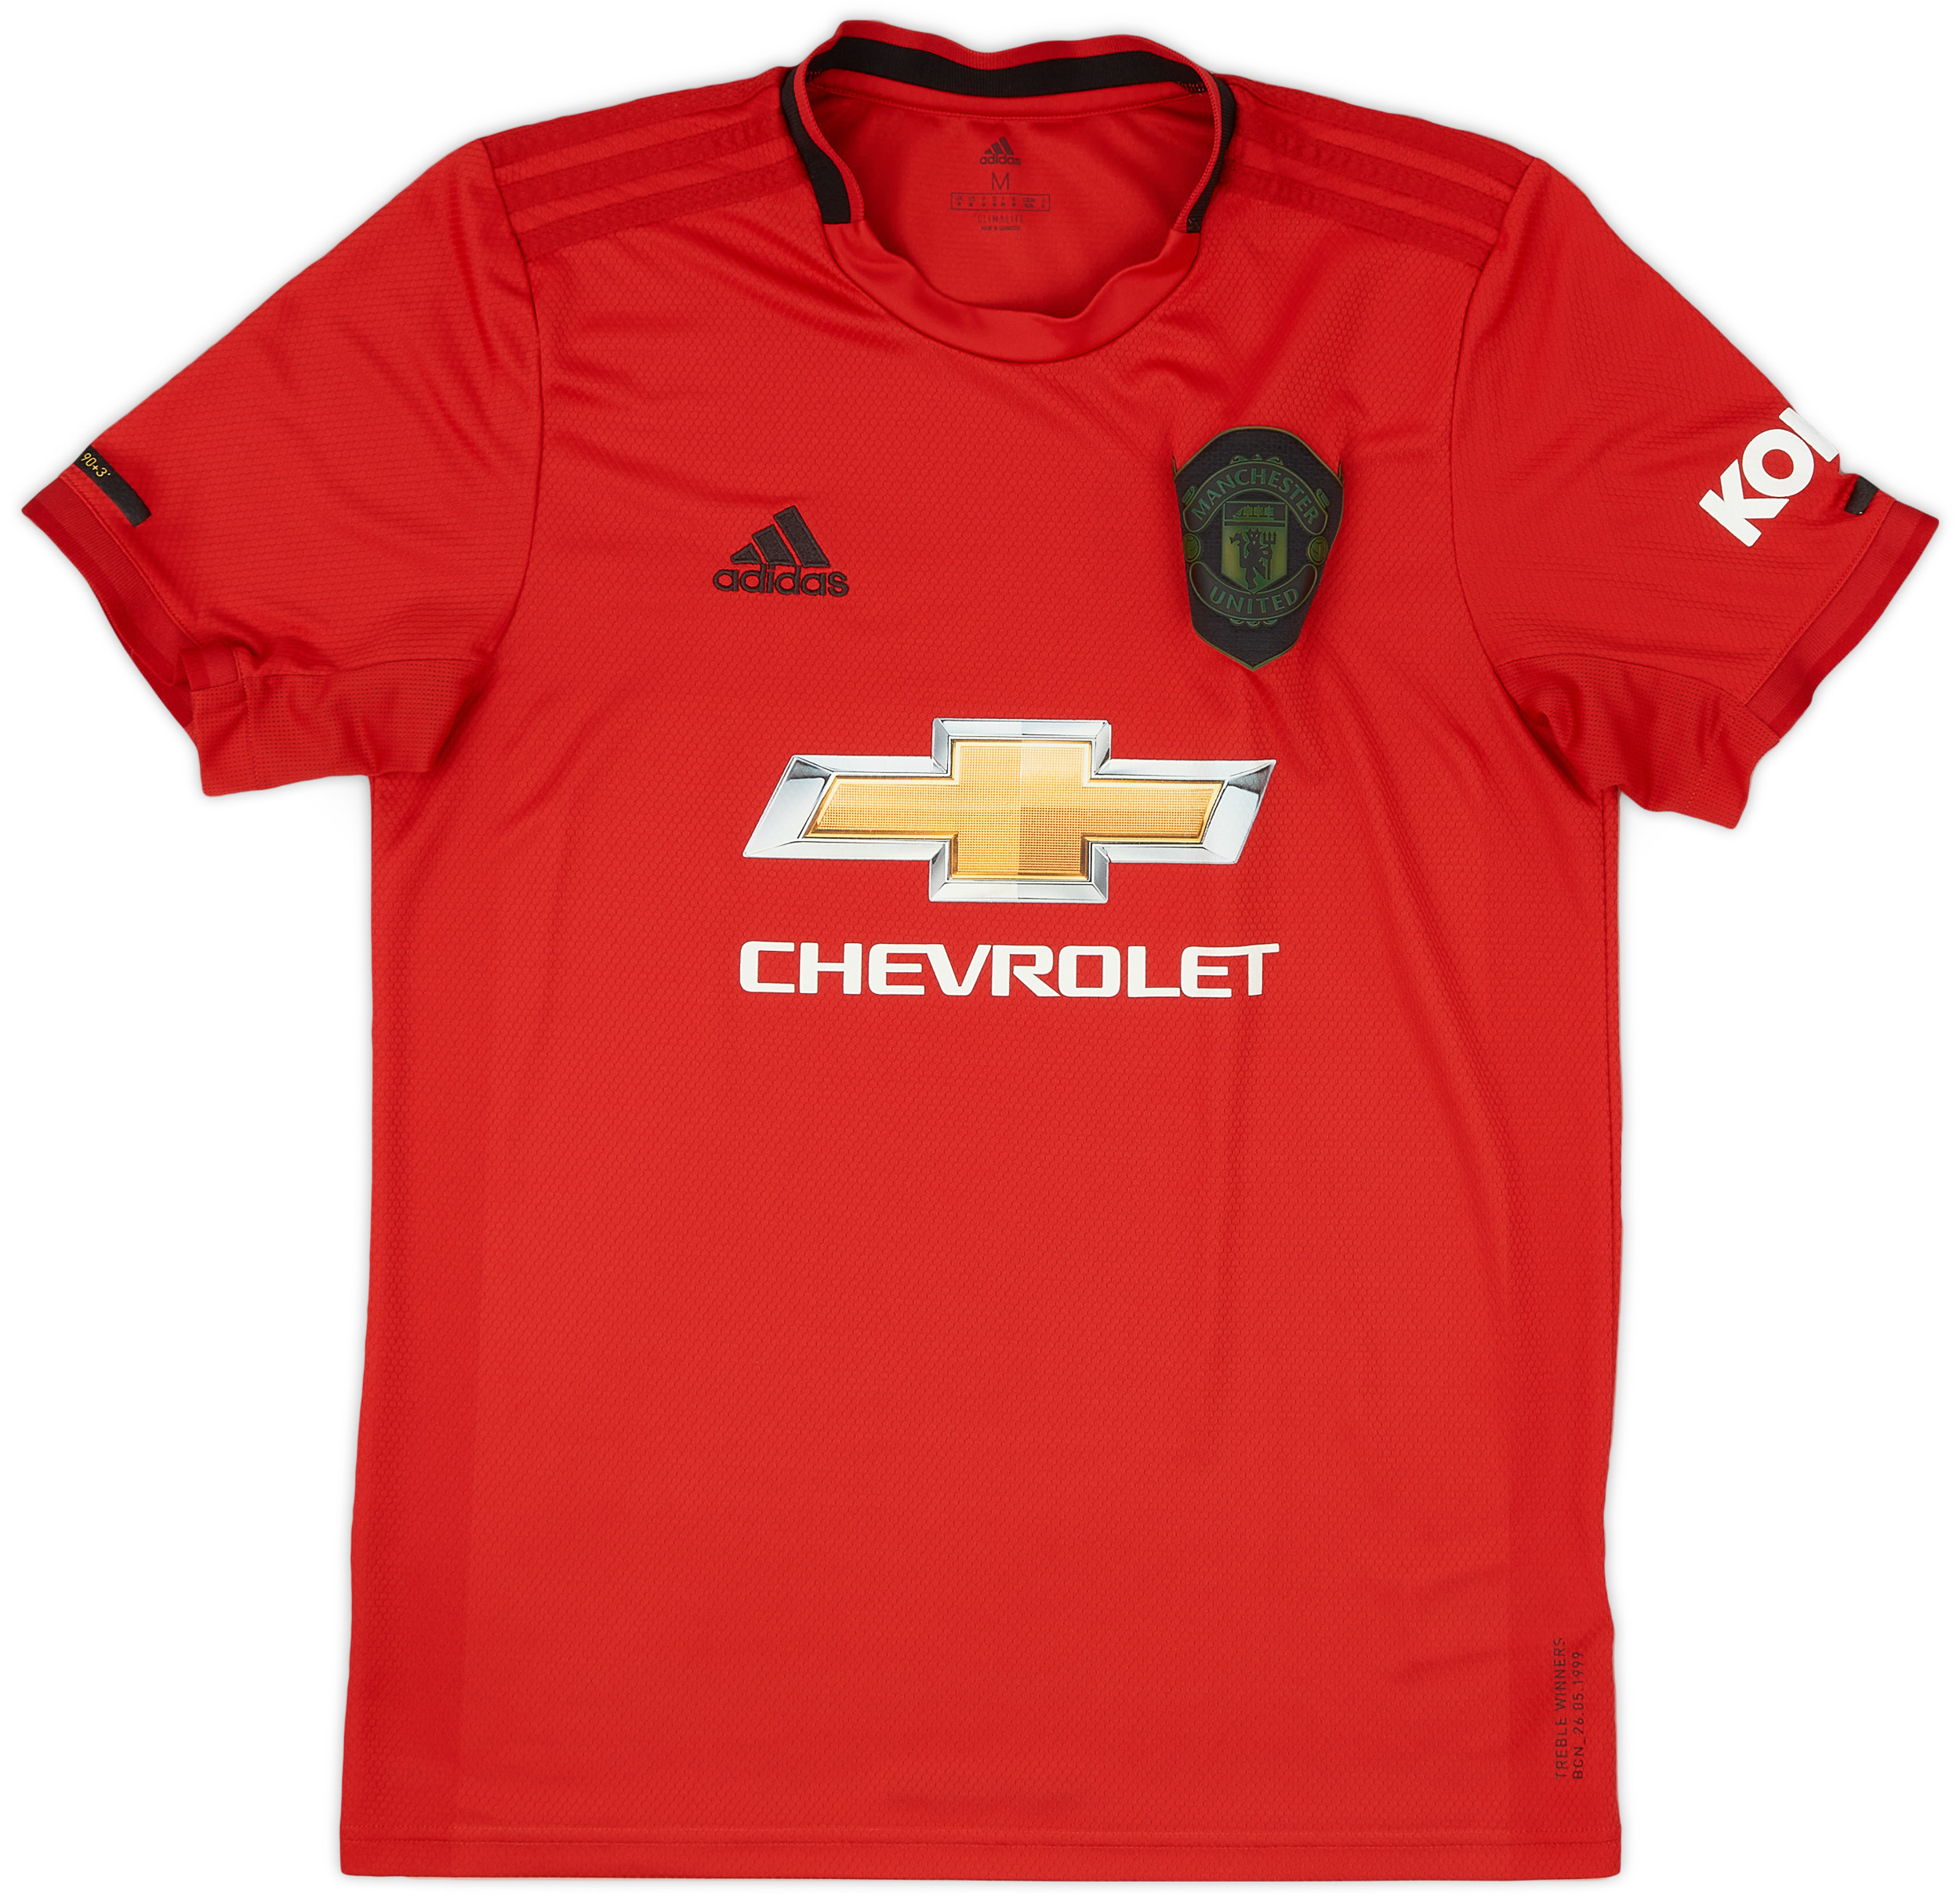 2019-20 Manchester United Home Shirt - 6/10 - ()